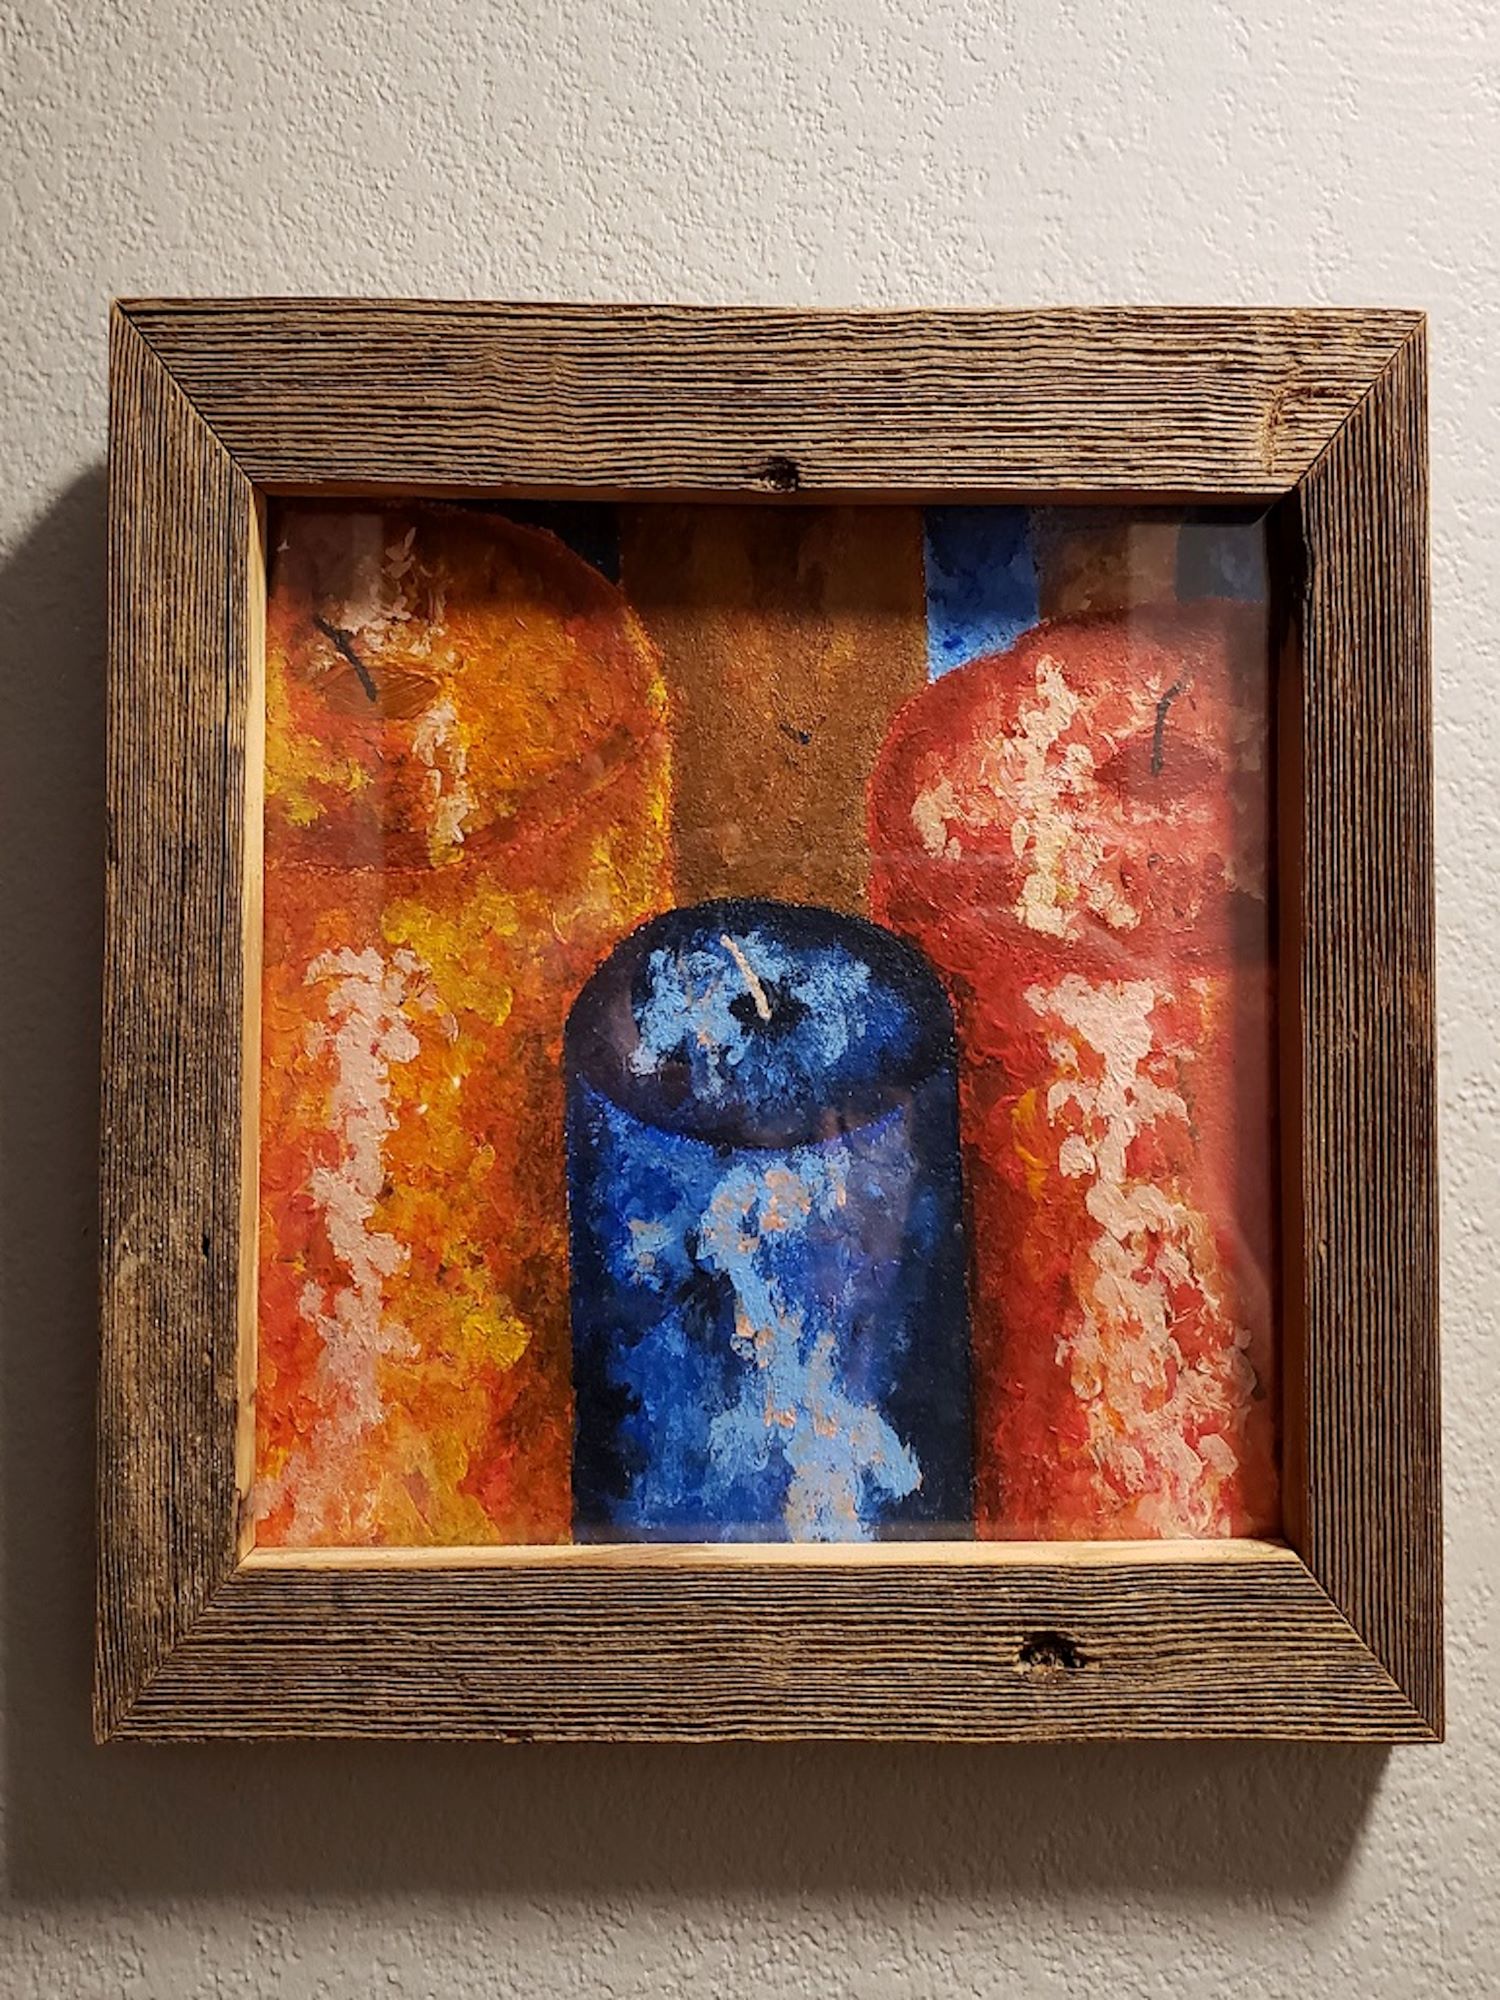 Painting of candles in a reclaimed barnwood frame